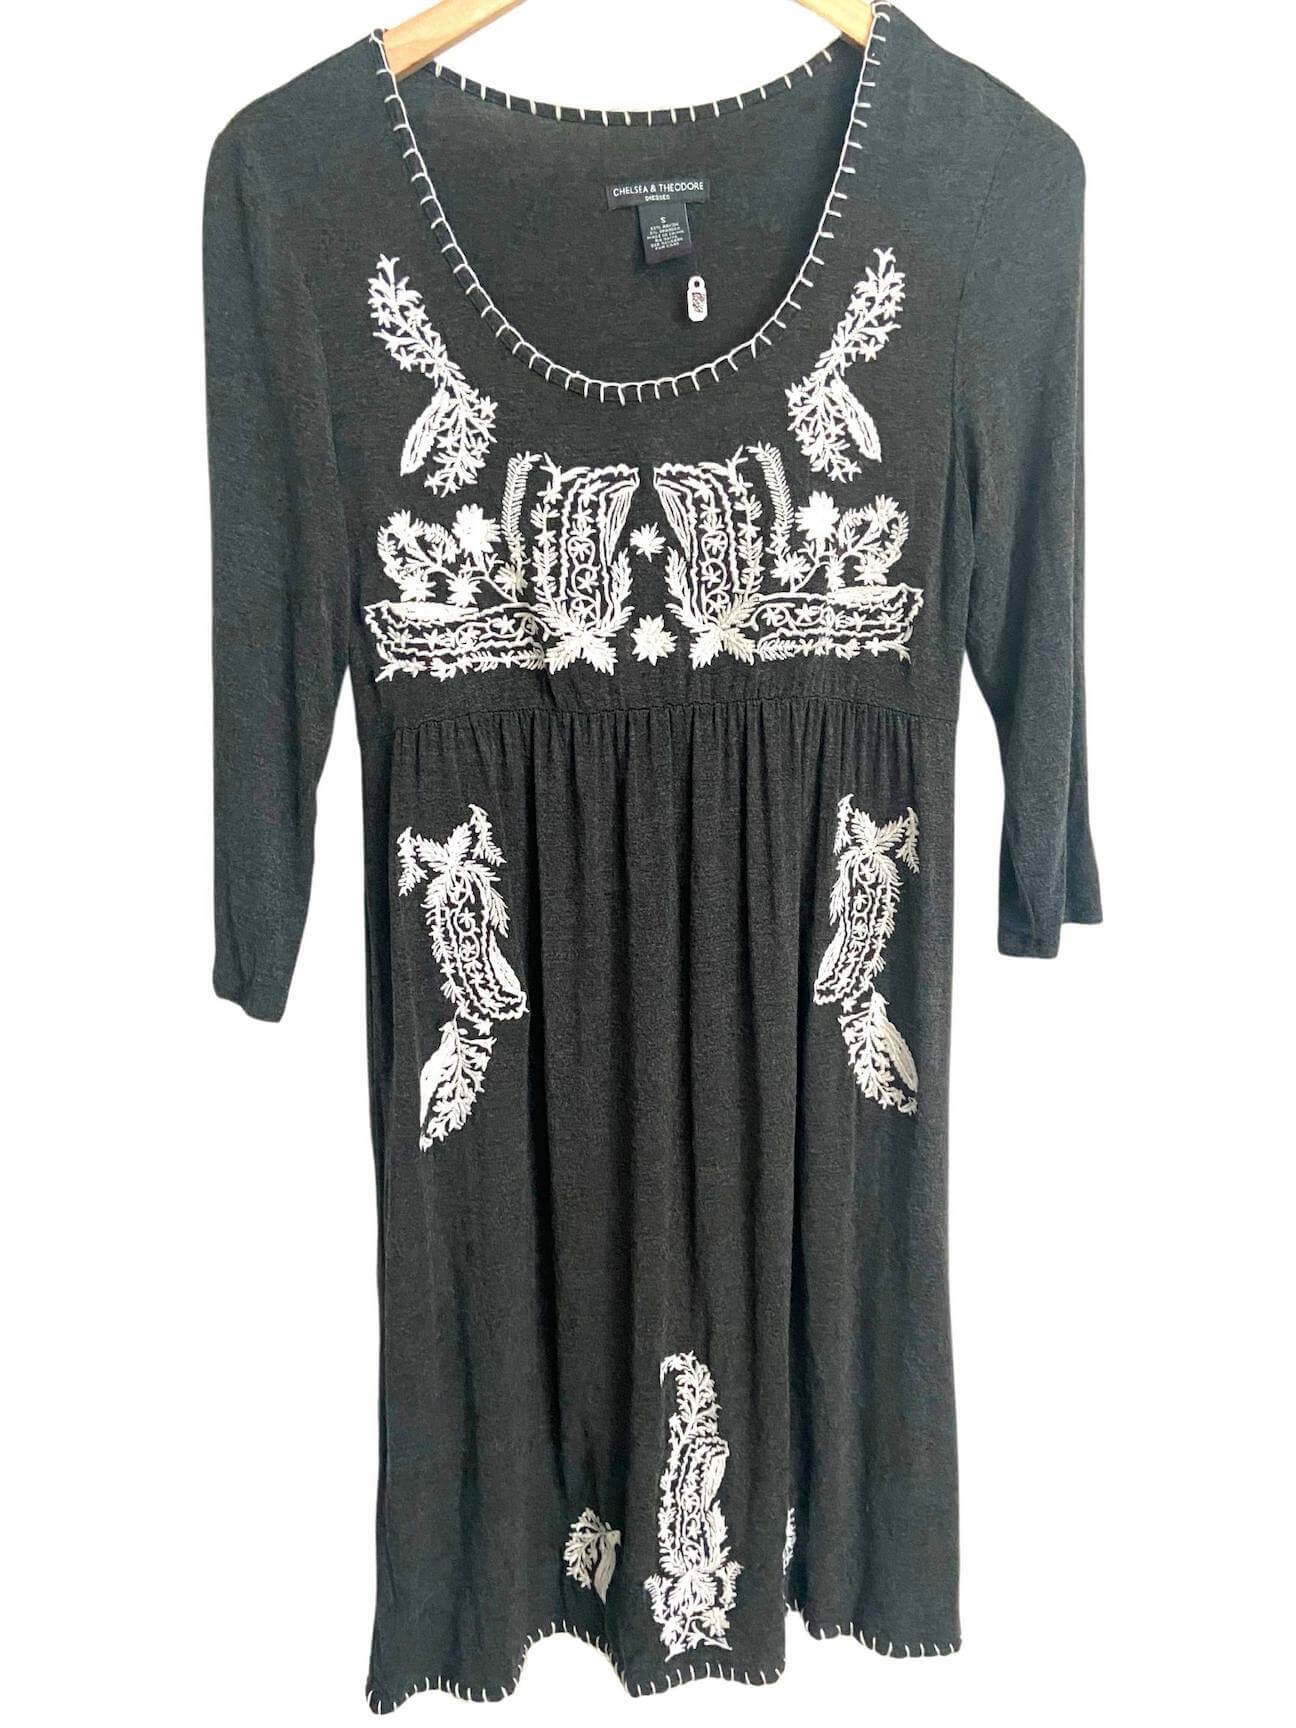 Cool Winter CHELSEA AND THEODORE gray embroidered dress